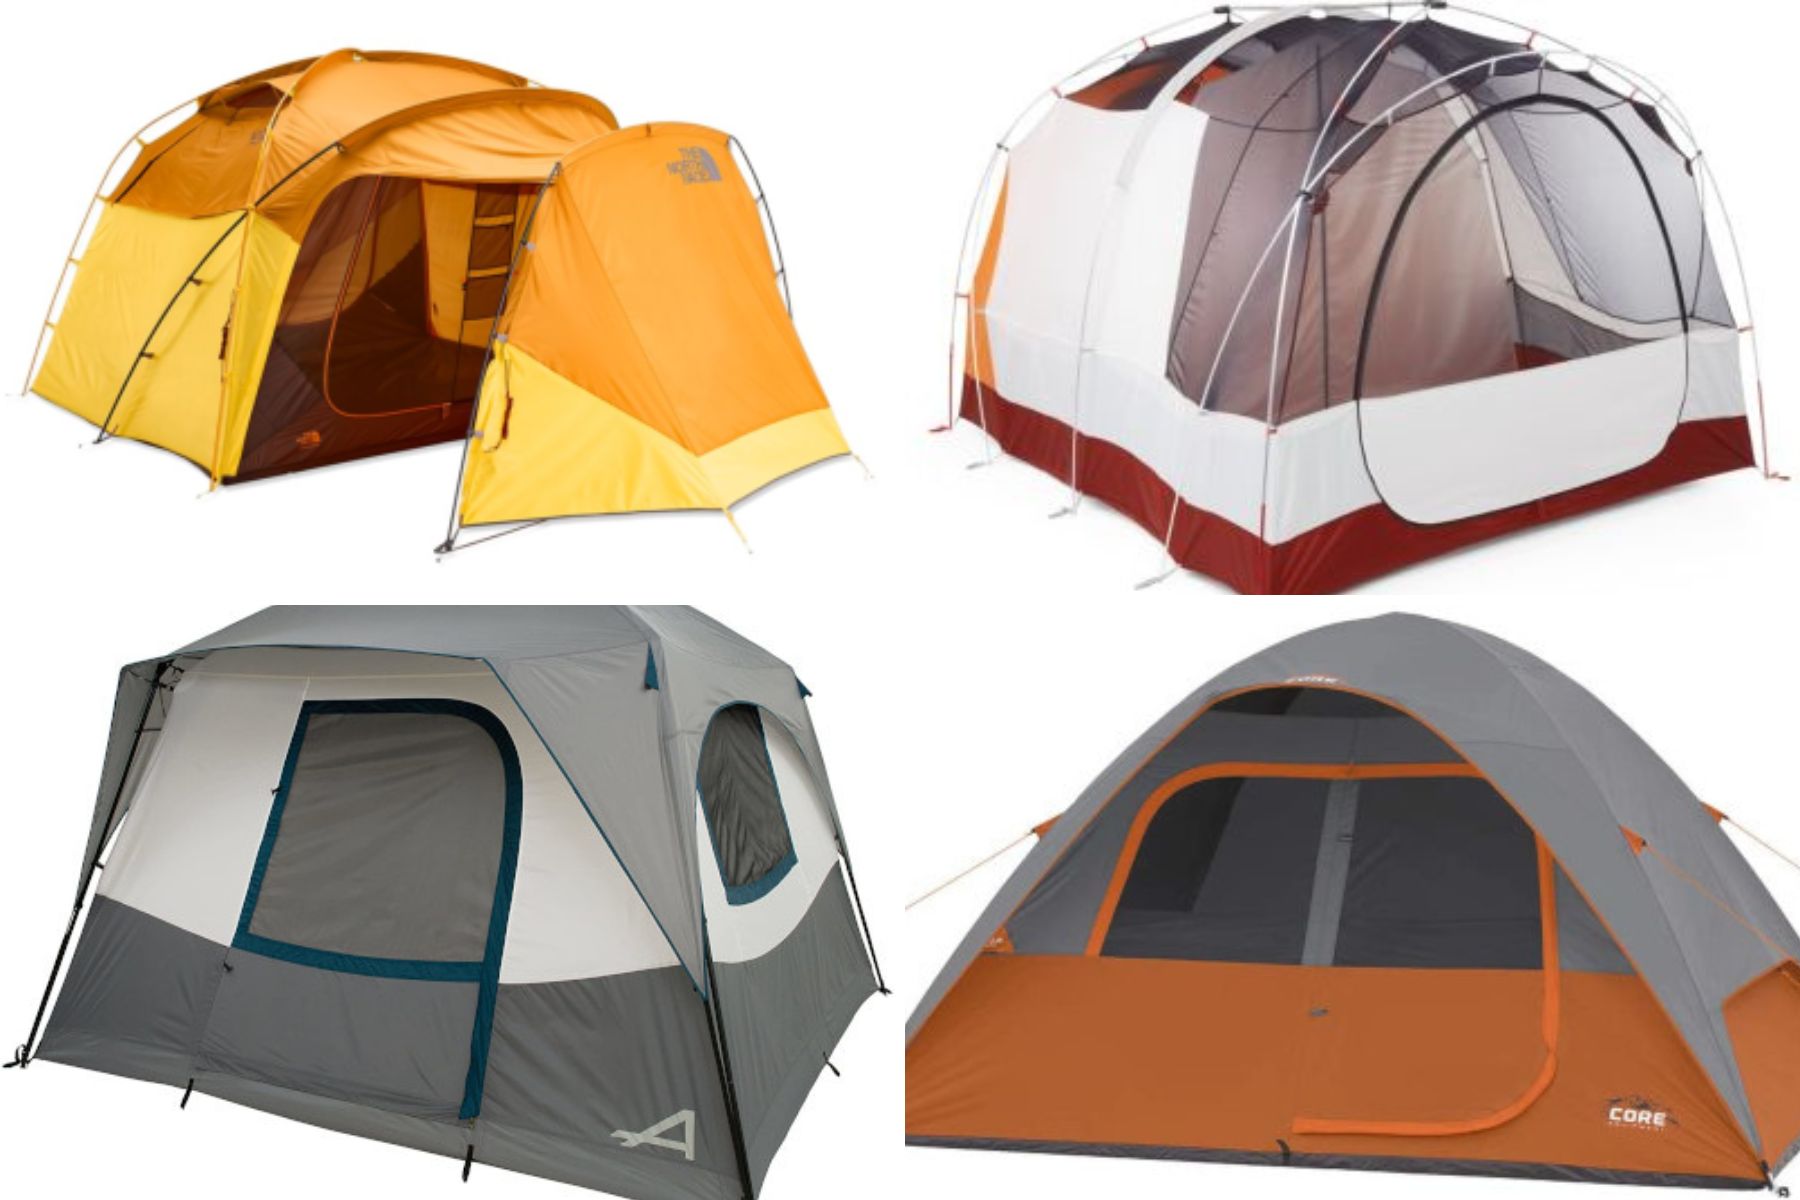 North Face and REI have great 6 person tent options - Hello Trail